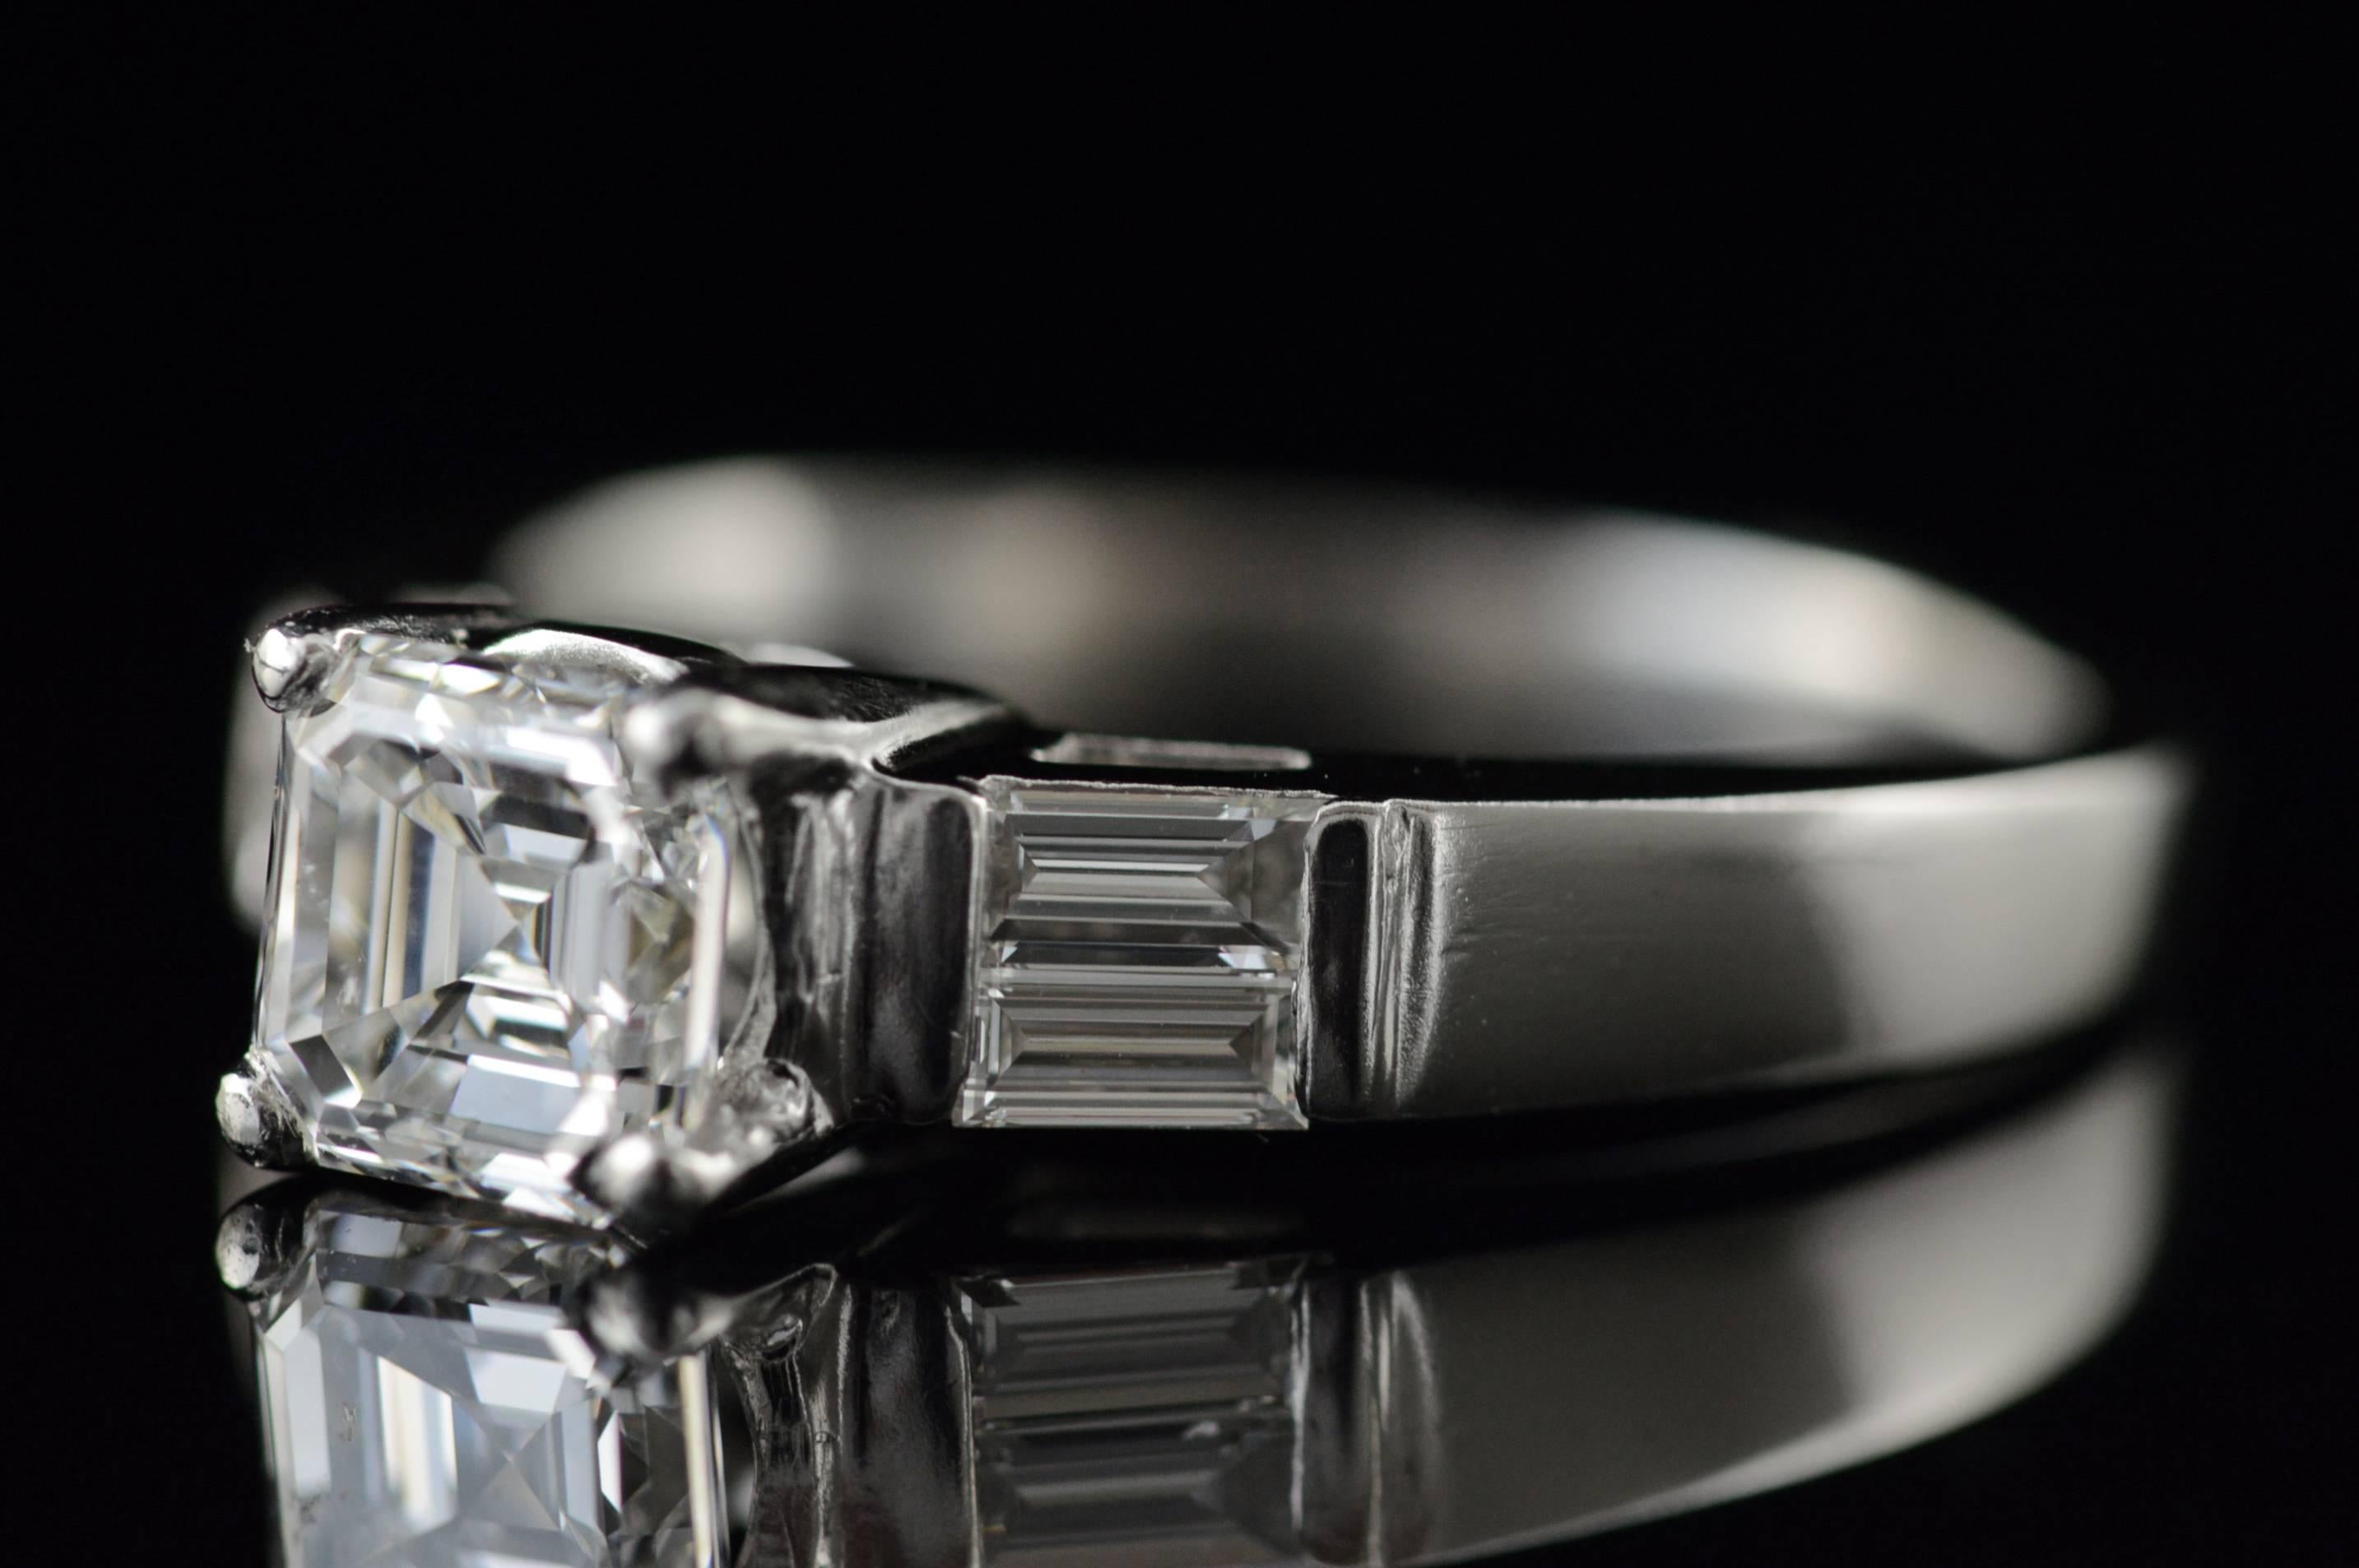 All diamonds are graded according to GIA grading standards.

·Item: Platinum GIA 1.02 Ascher E Color VS1 1.52 Ctw Emerald Cut Accent Diamond Engagement Ring Size 5.5

·Era: Modern / 2000s

·Composition: Platinum Marked/Tested

·Gem Stone: